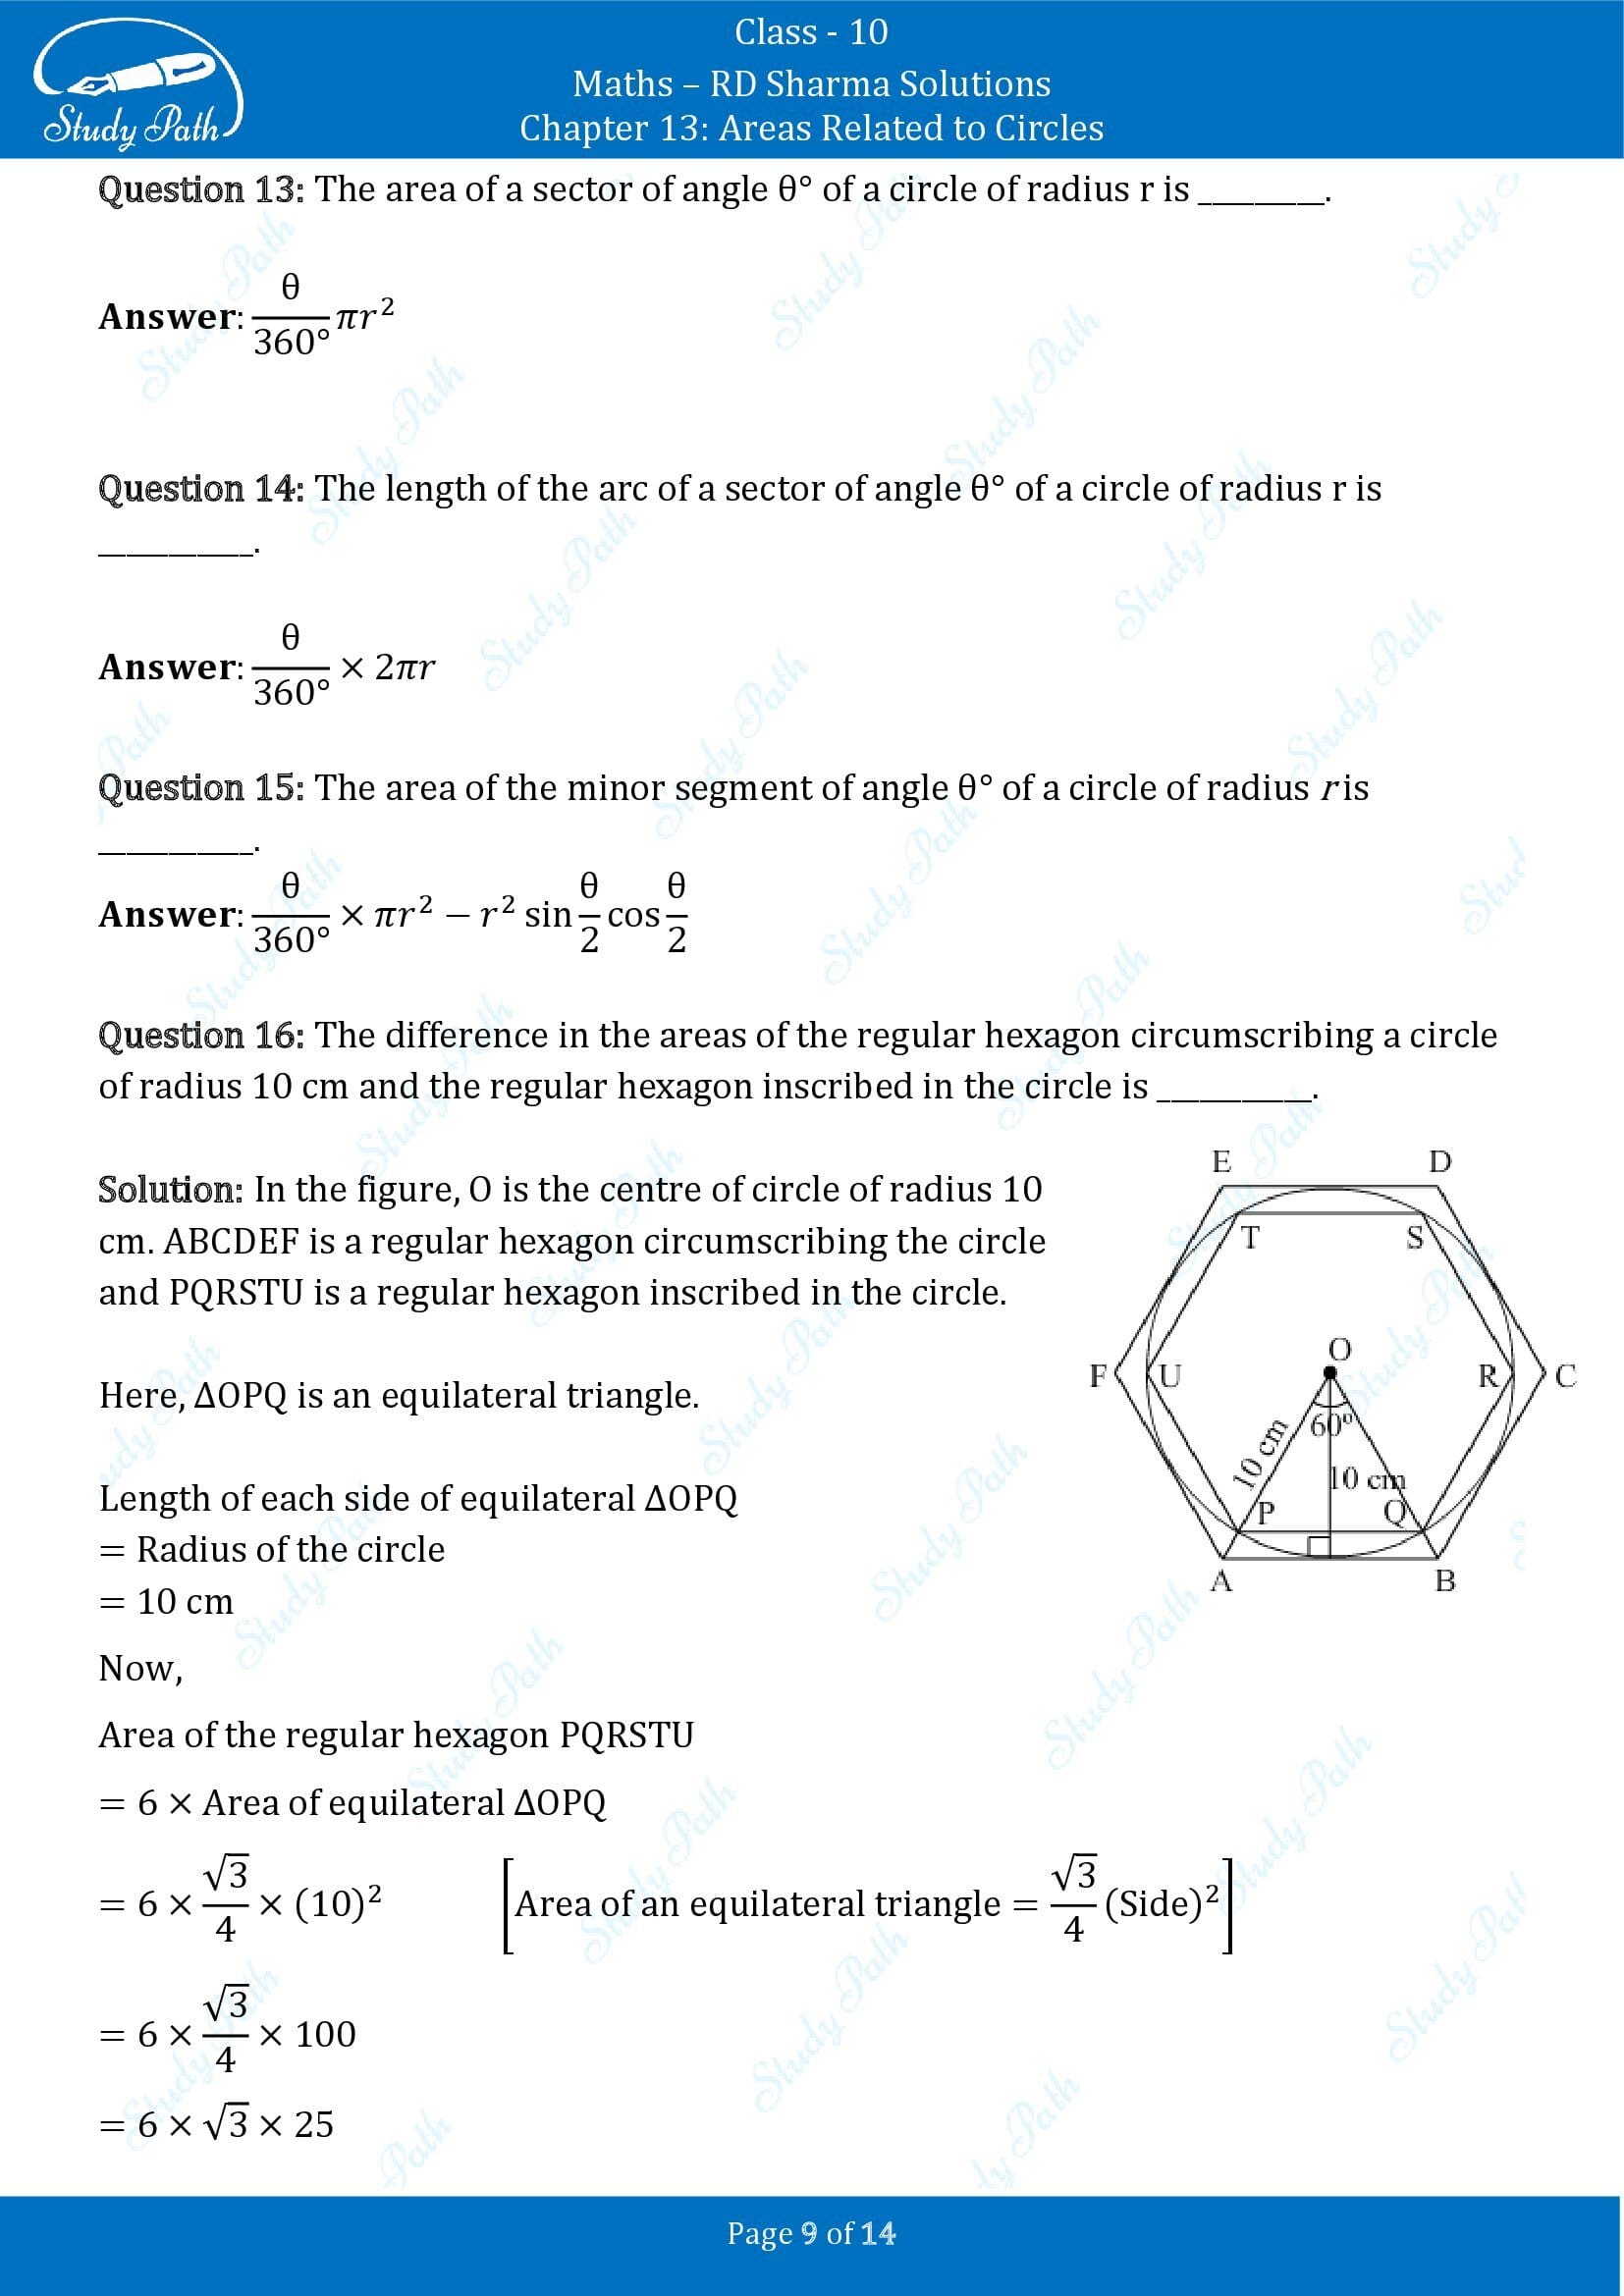 RD Sharma Solutions Class 10 Chapter 13 Areas Related to Circles Fill in the Blank Type Questions FBQs 00009